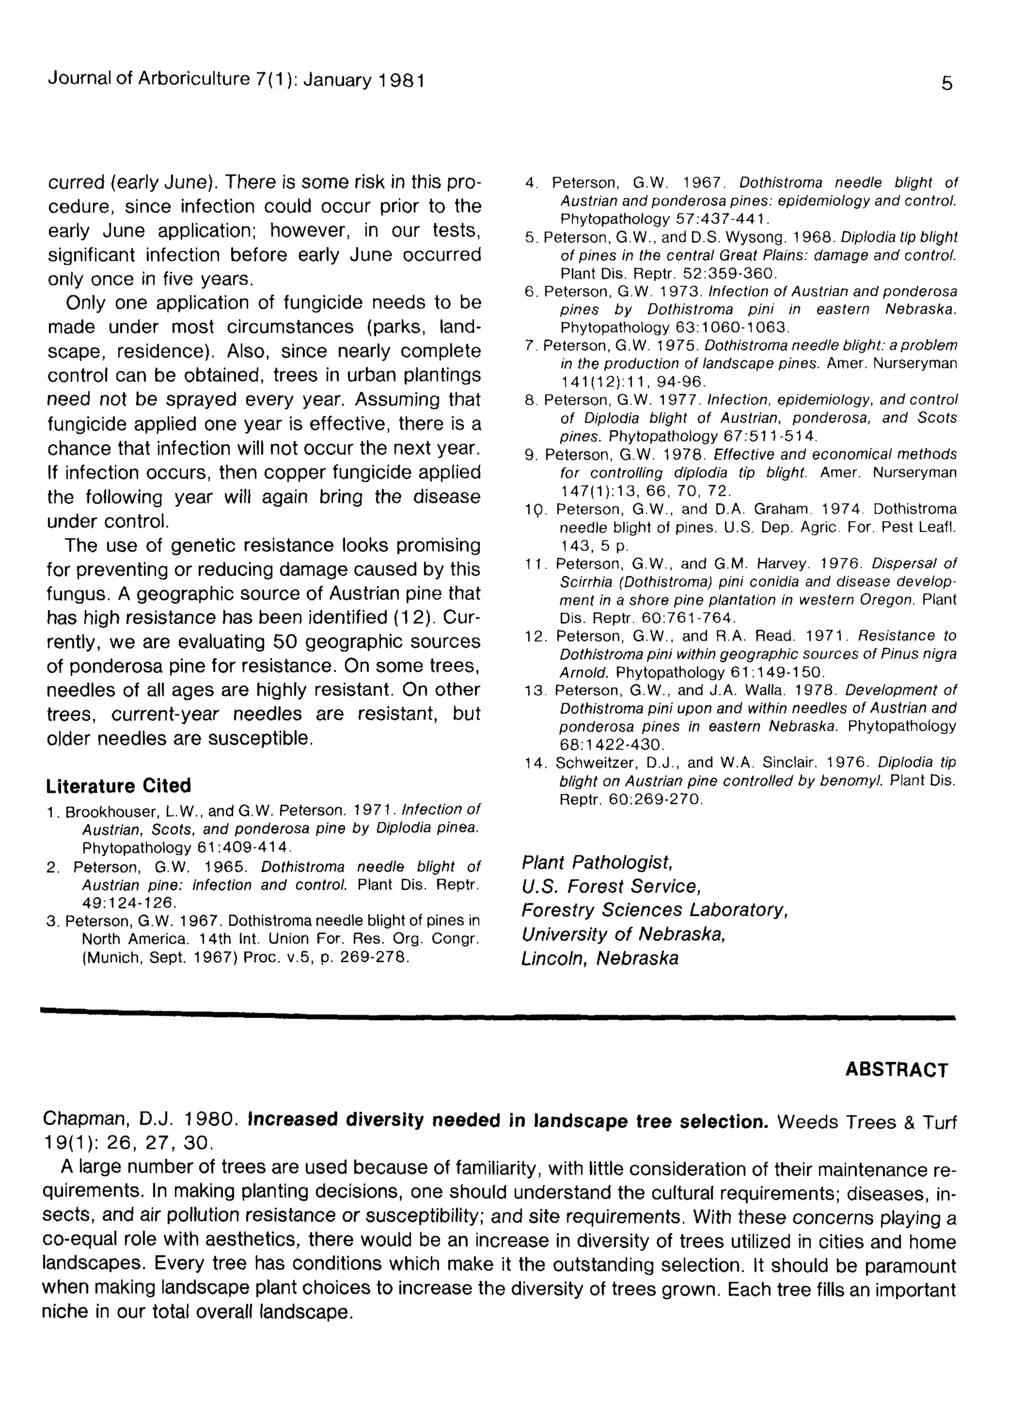 Journal of Arboriculture 7(1): January 1 981 curred (early June).